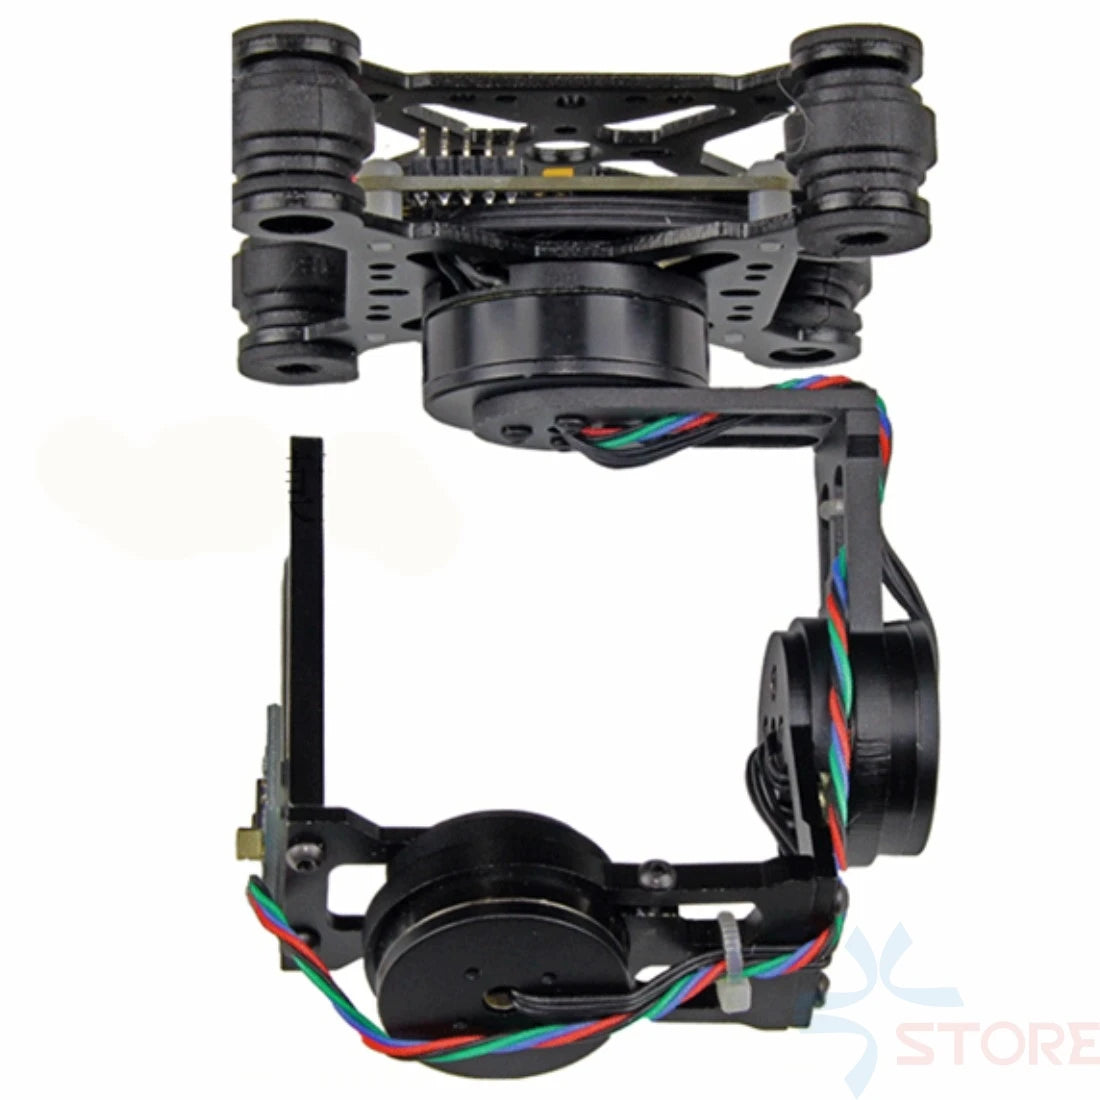 1:When receive the gimbal, first install the camera, then supply the power